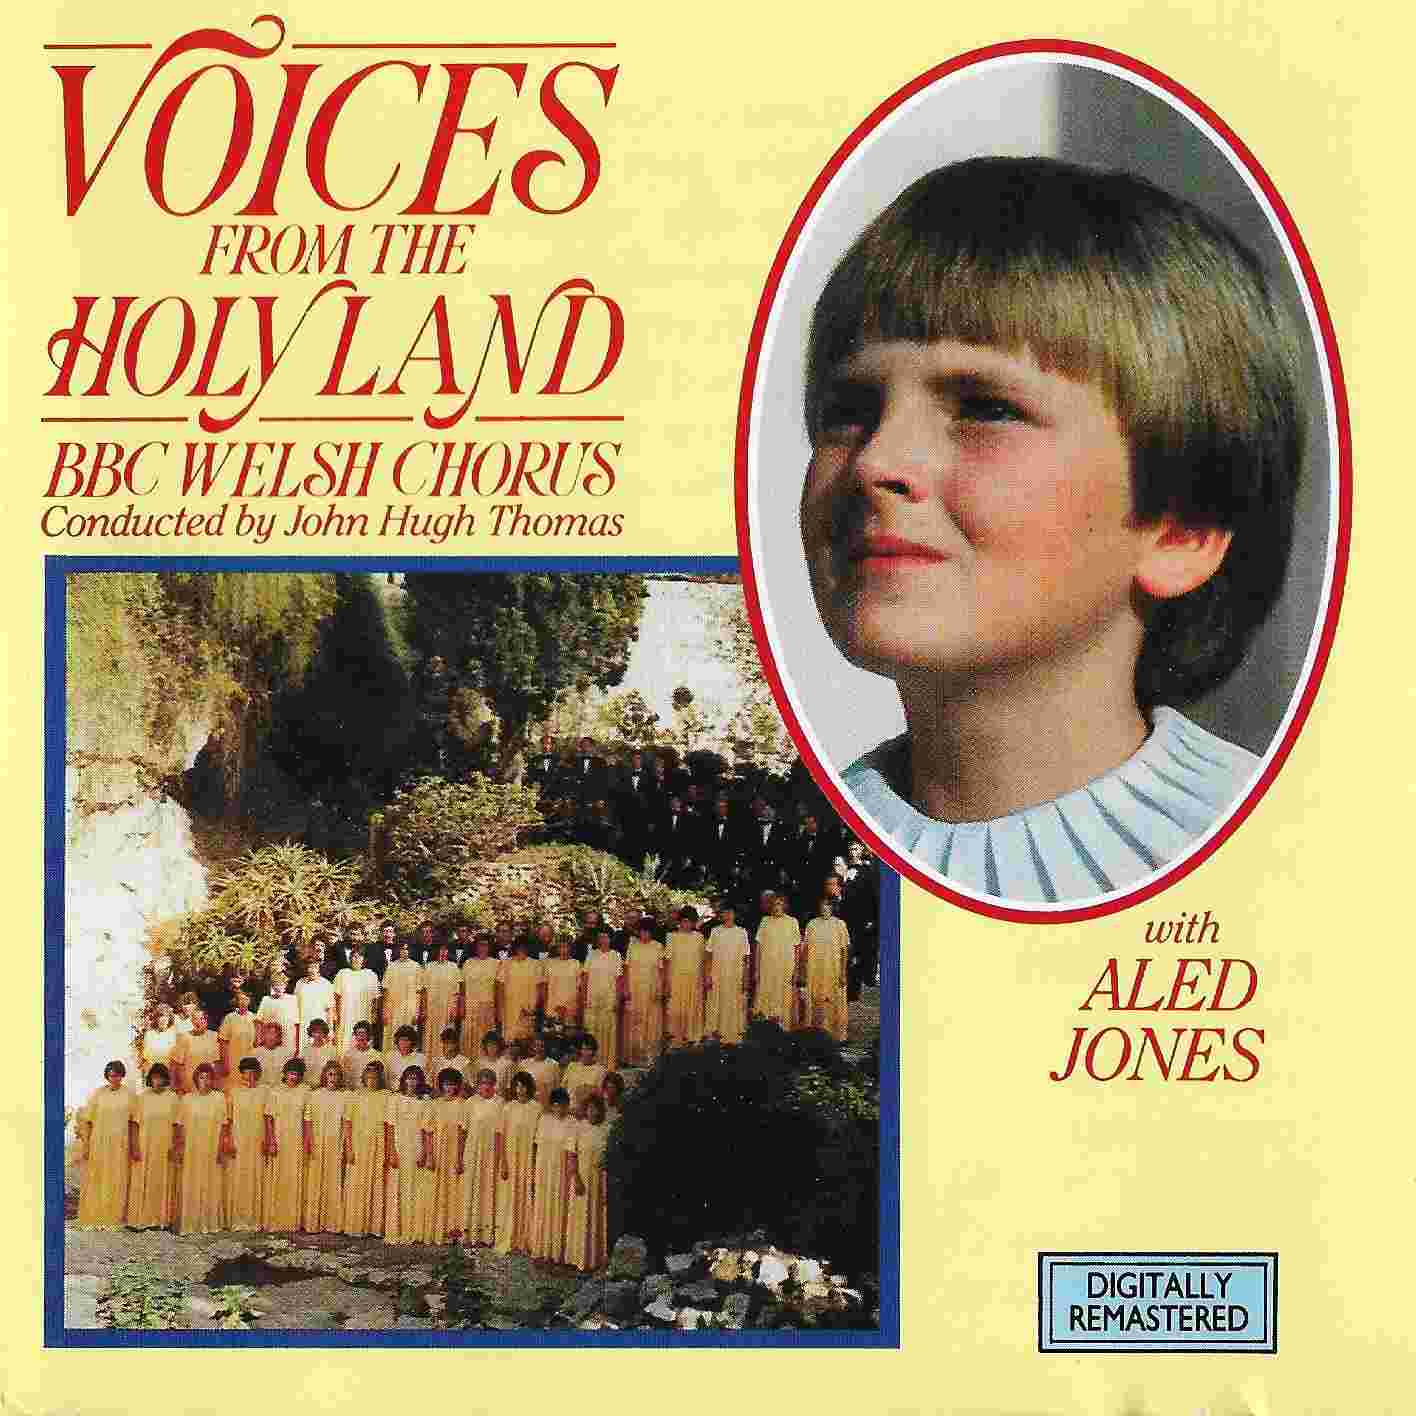 Picture of Voices from the Holy Land by artist Various from the BBC cds - Records and Tapes library